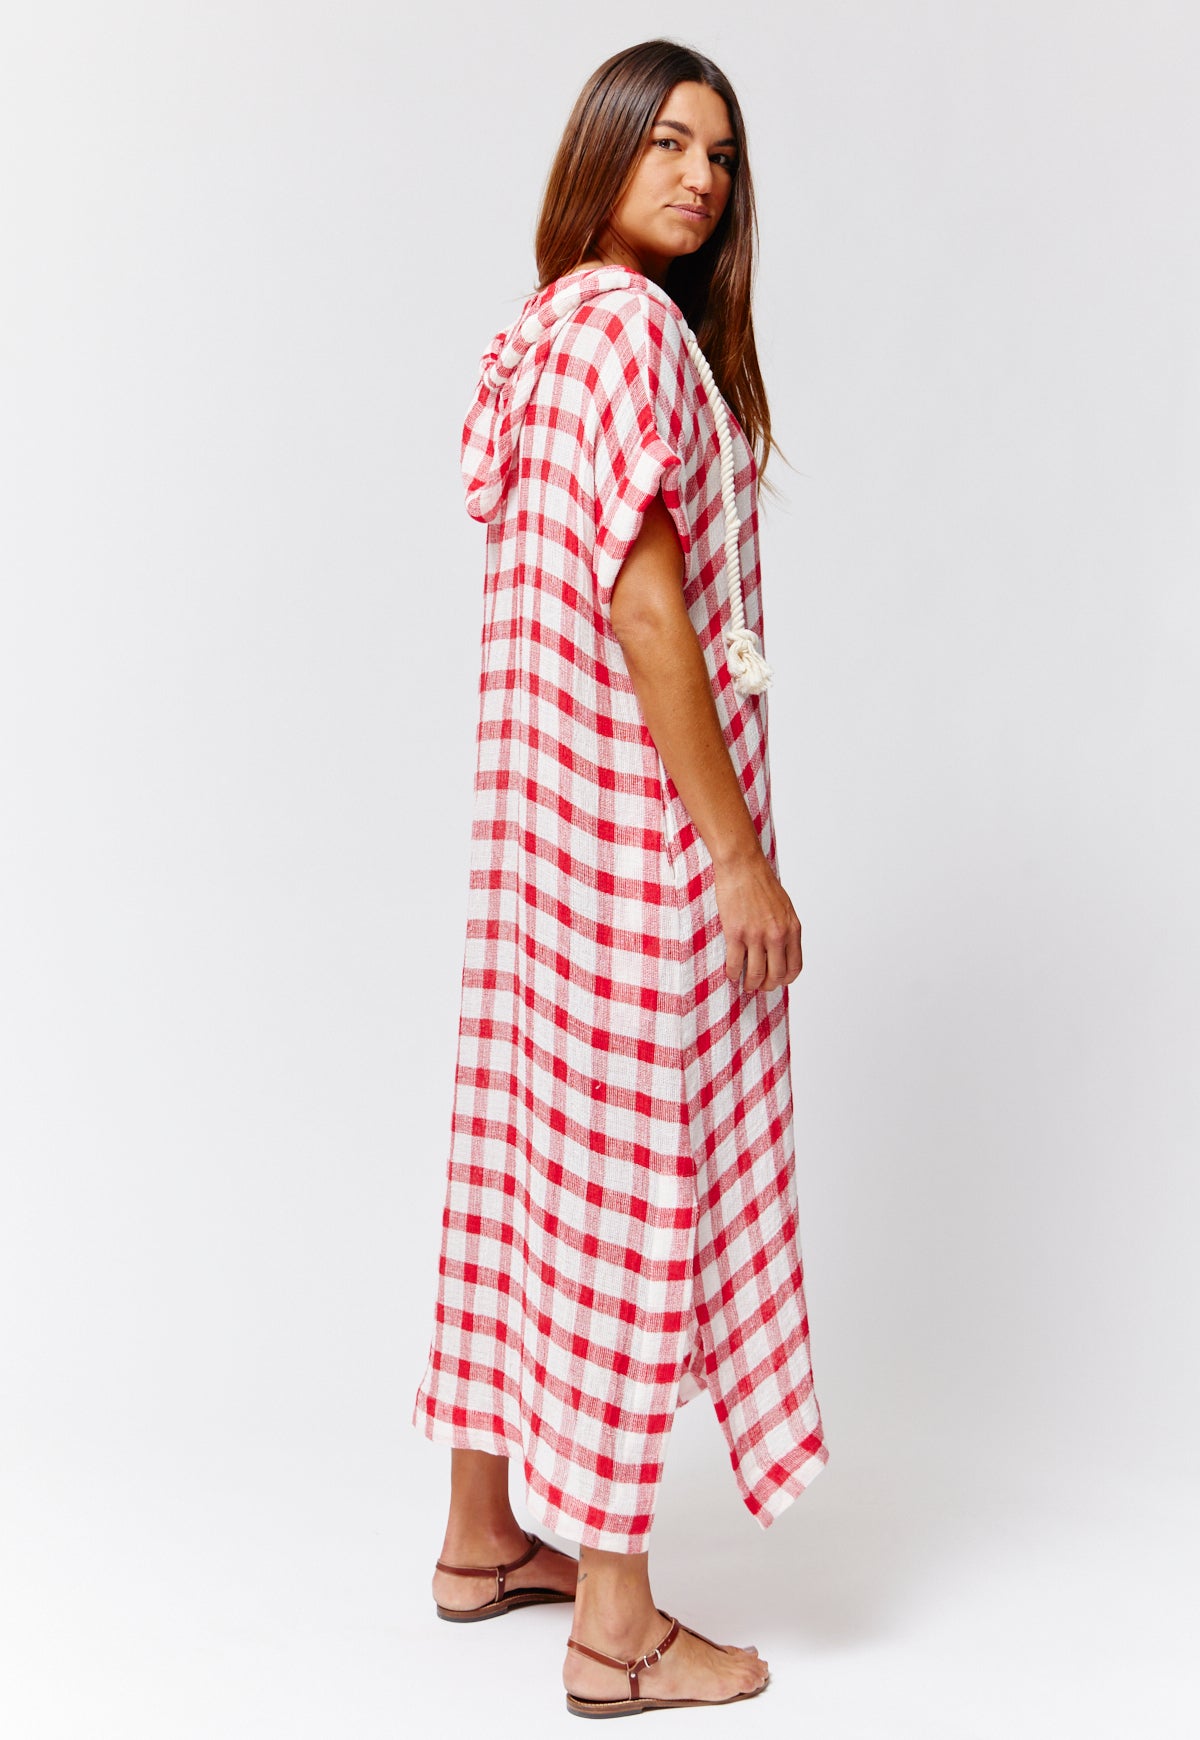 THE DRAWSTRING HOODED CAFTAN in TOMATO GINGHAM CHIOS GAUZE